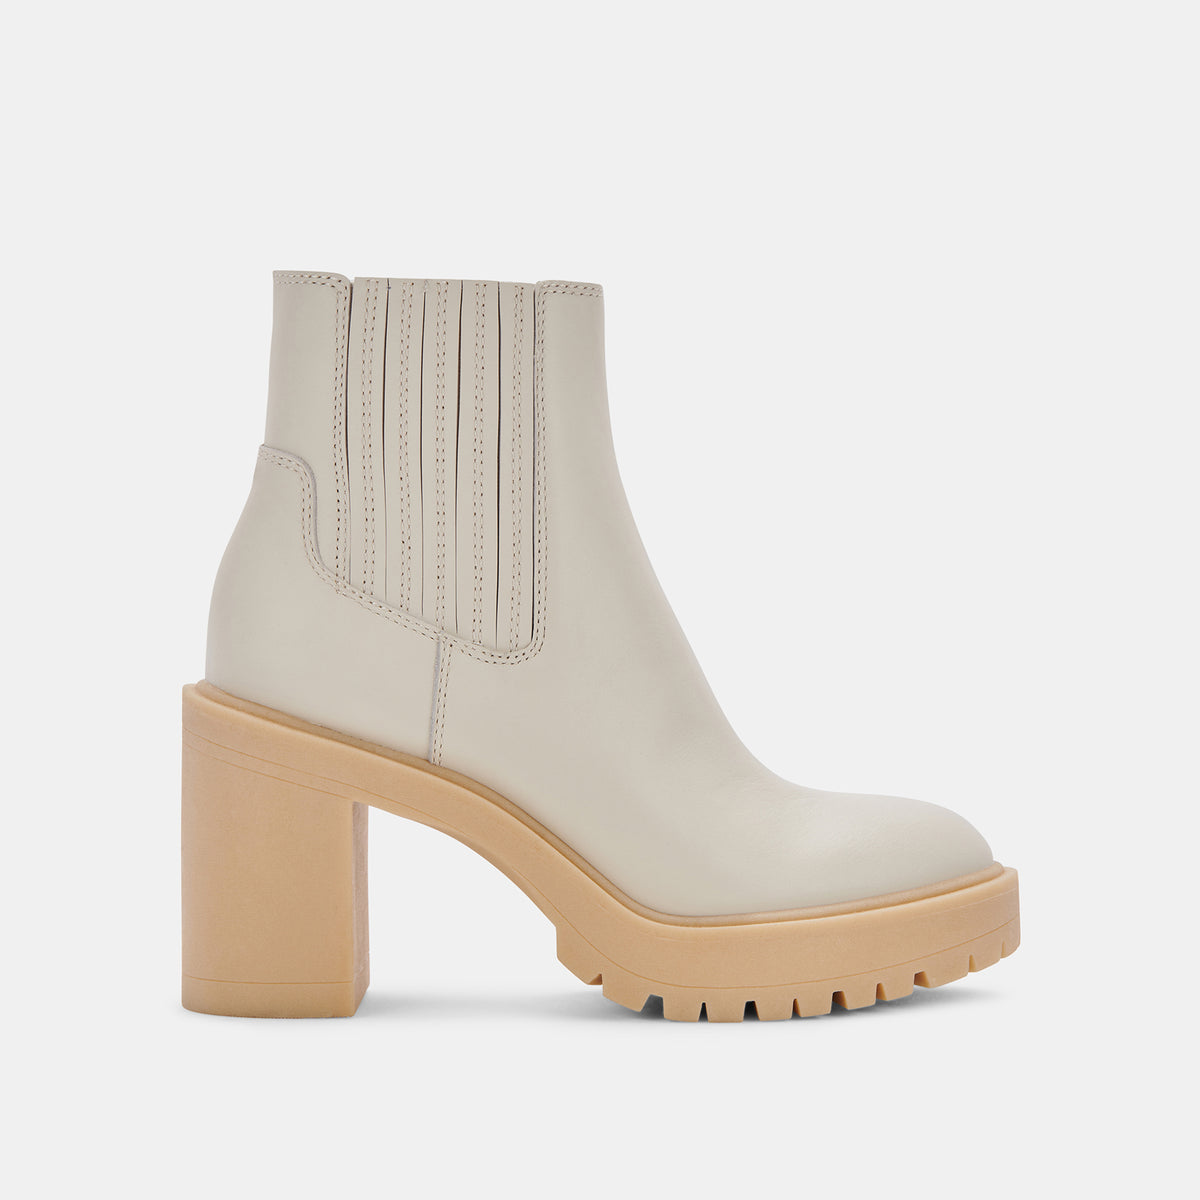 CASTER H2O BOOTIES IVORY LEATHER – Dolce Vita